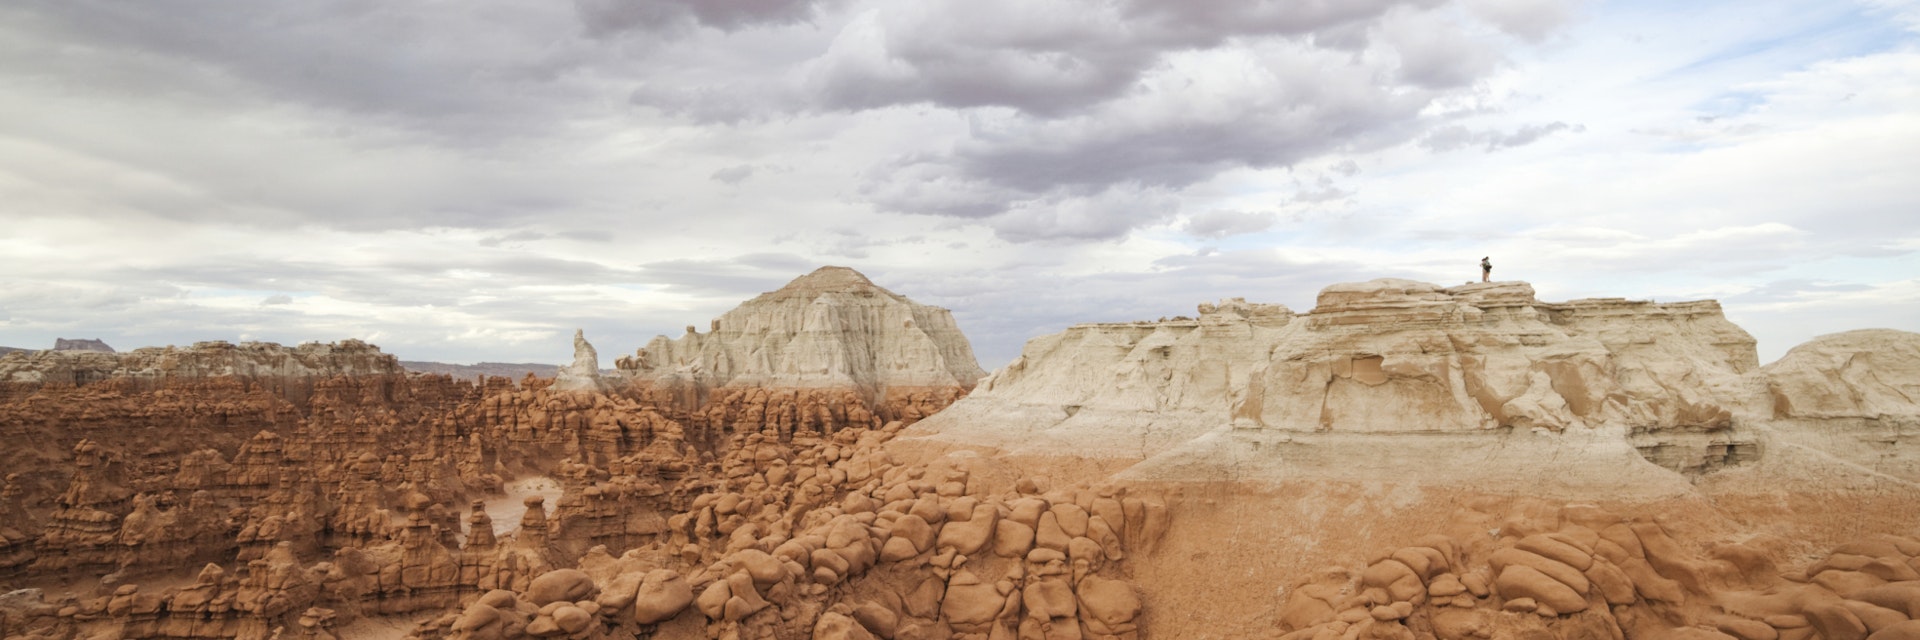 Hikers stand on the summit of a high mesa overlooking the vast field of hoodoos at Goblin Valley State Park, Utah.